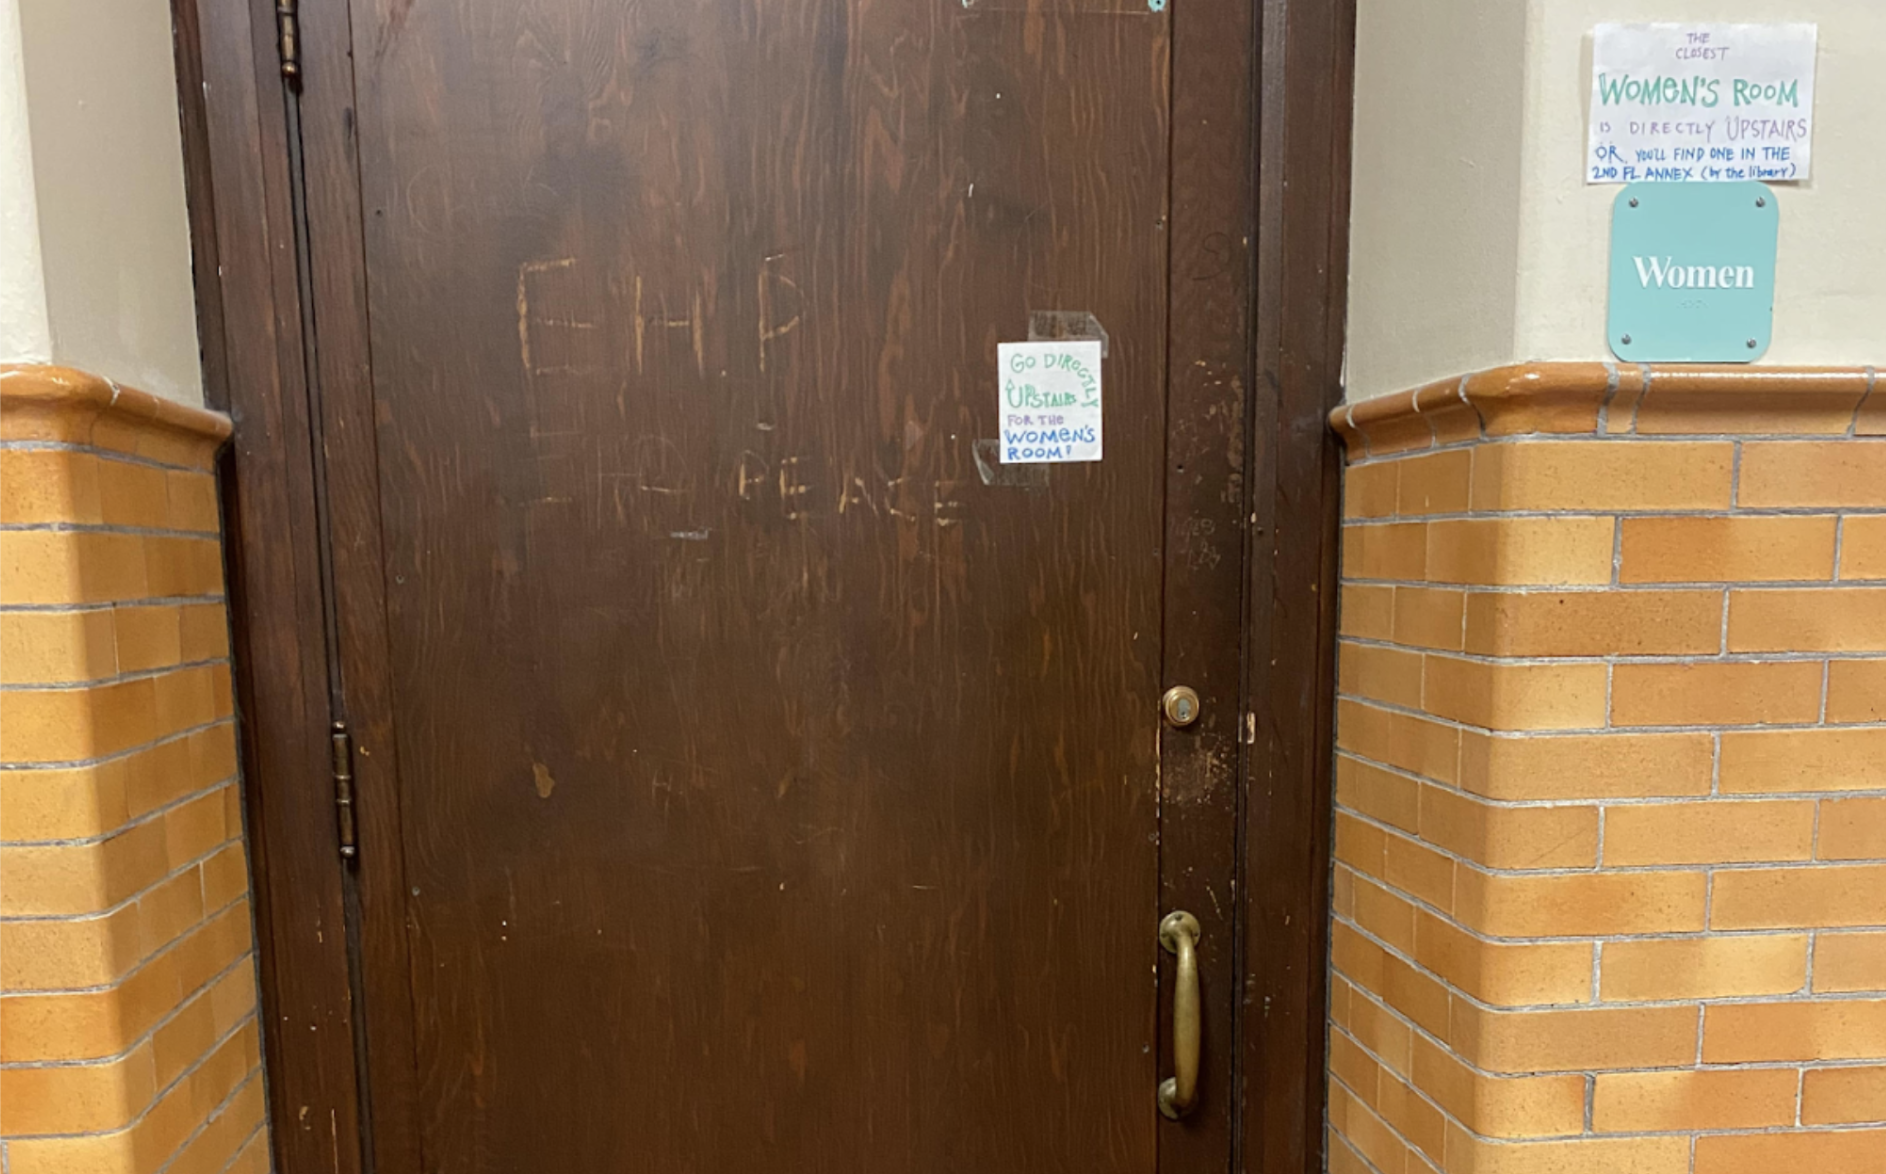 The locked door of the second-floor main Womens restroom with a sign that reads: The closest womens room is directly upstairs or youll find one in the 2nd fl. annex.